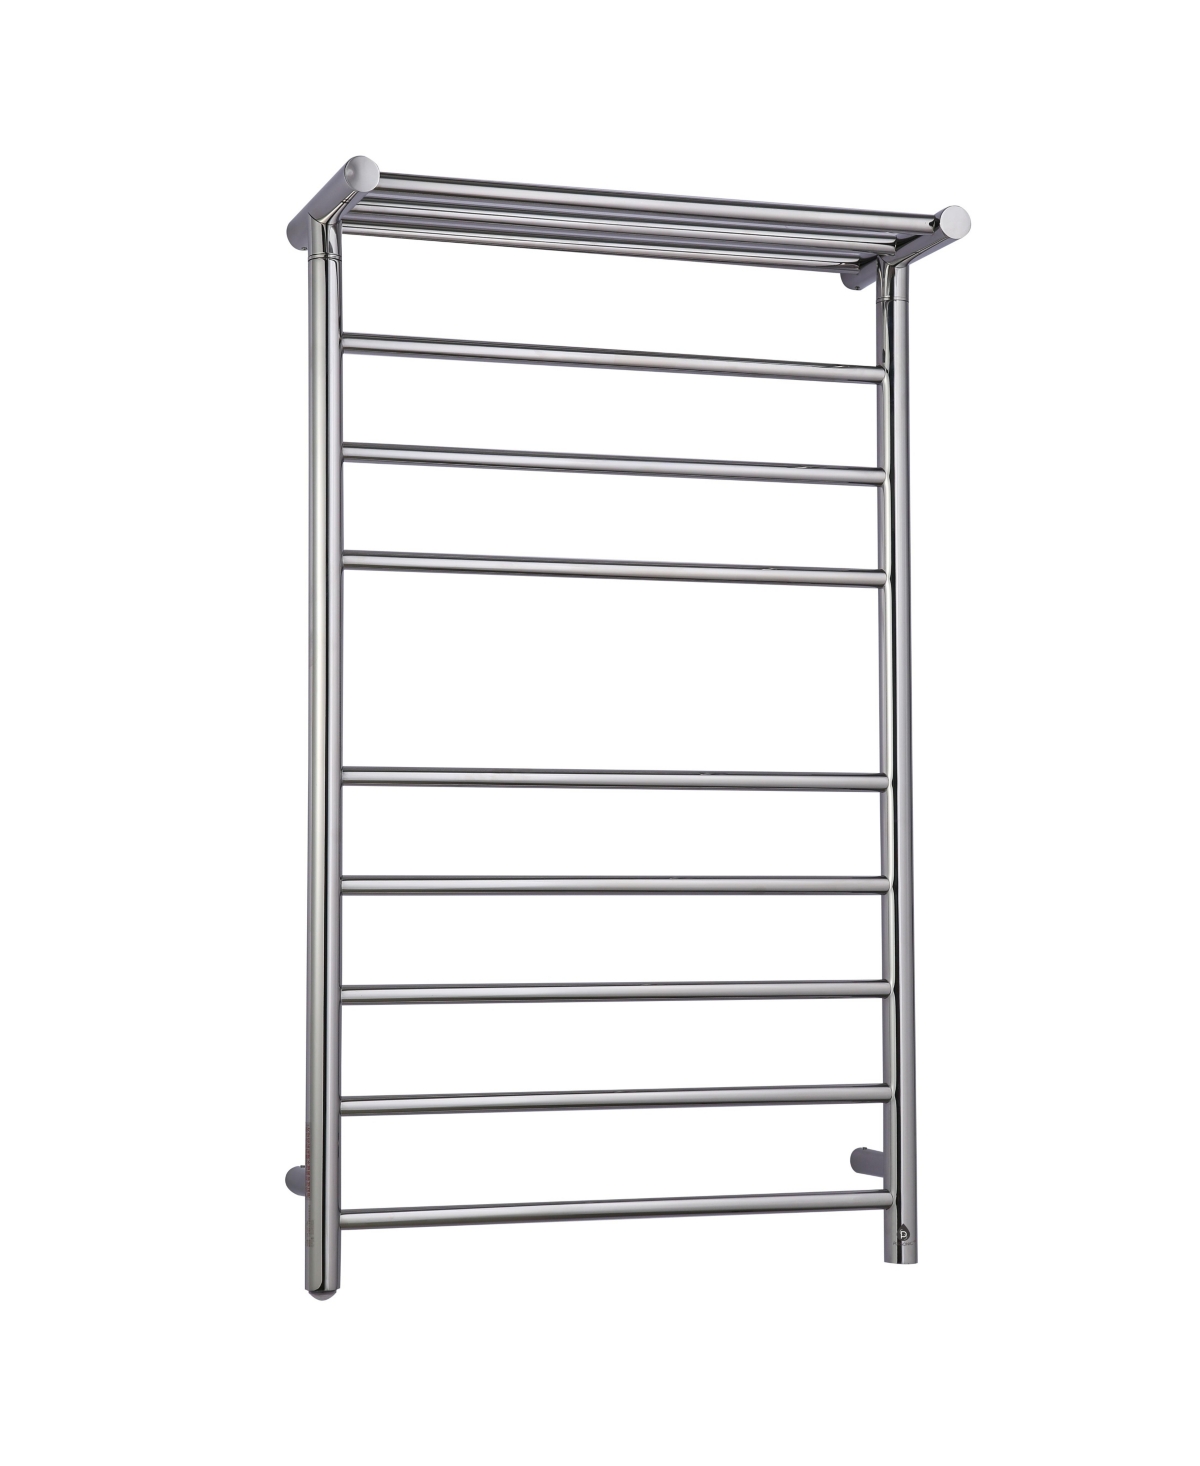 Stainless Steel Electric Towel Warmer in Silver - Silver